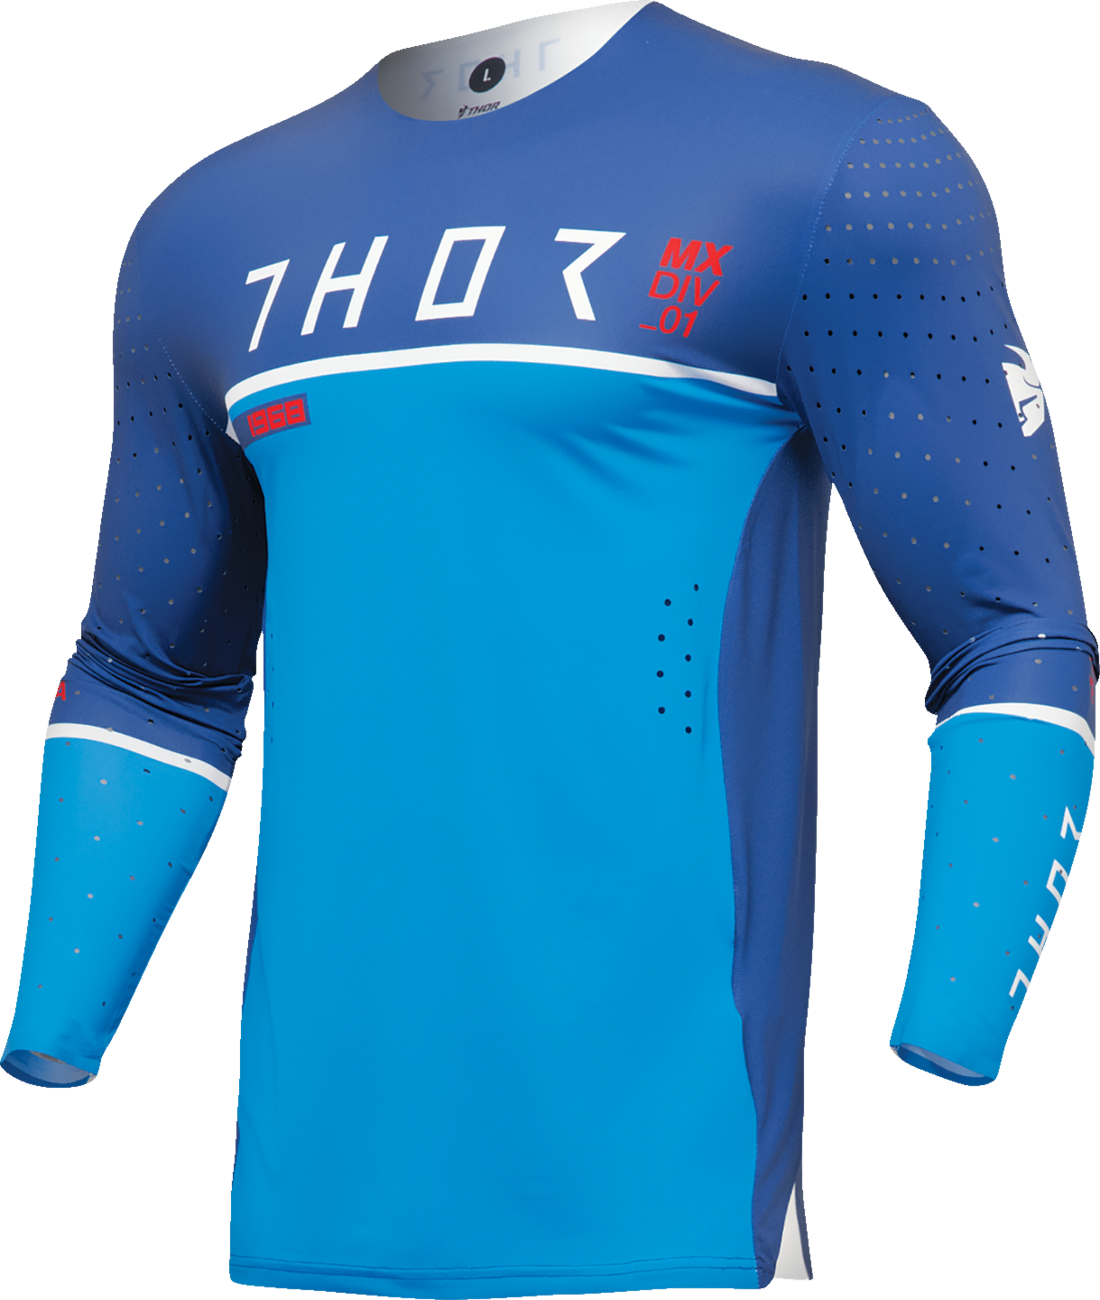 THOR Prime Ace Jersey - Navy/Blue - 3XL 2910-7676